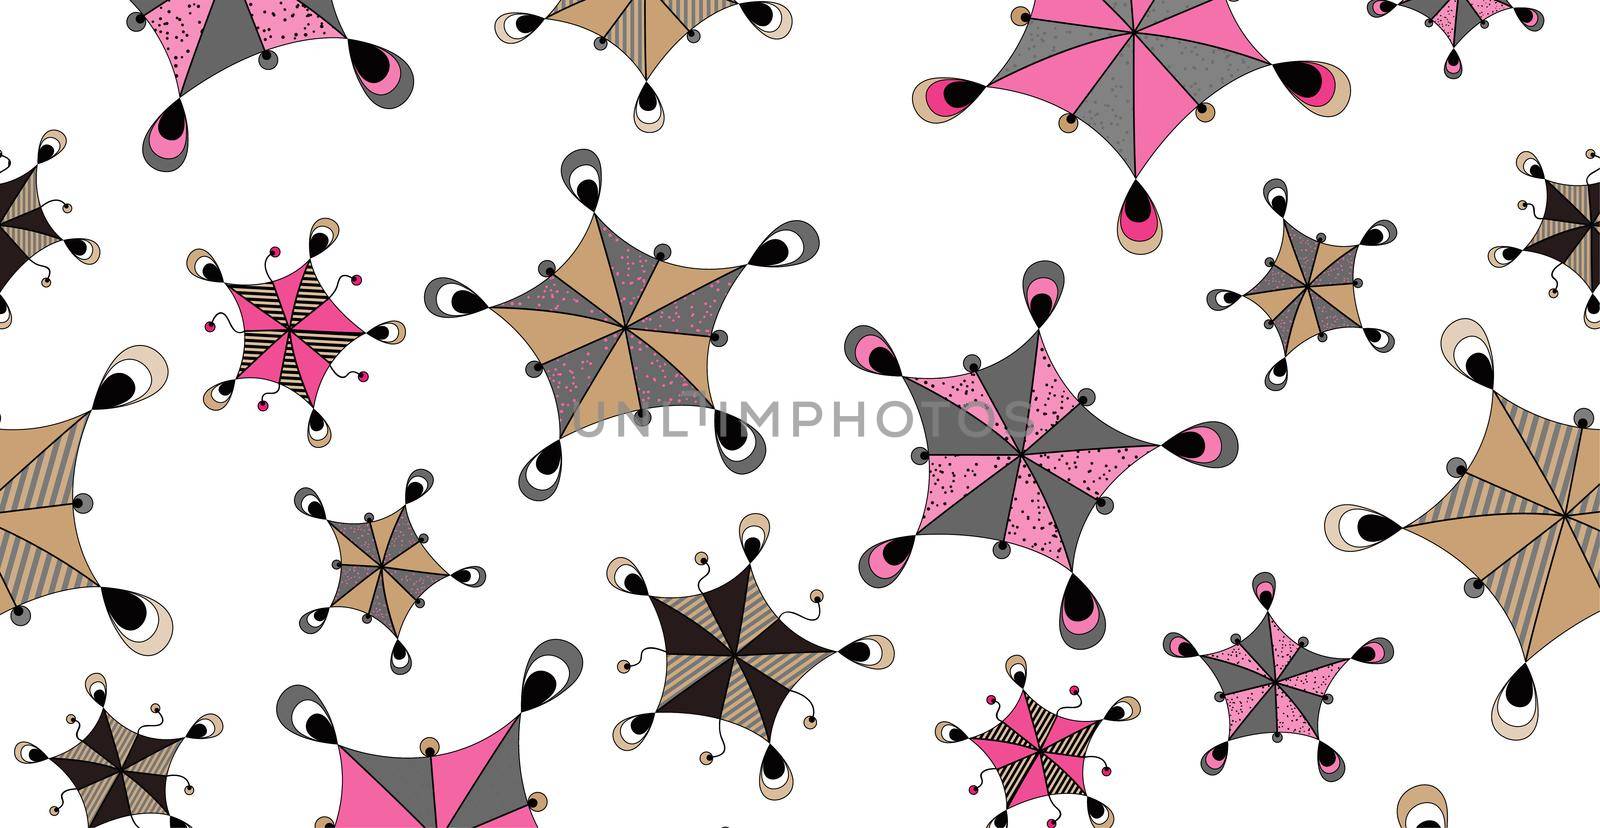 Abstract cartoon doodle background. Funny geometric figures similar to umbrellas.  by AndreyKENO